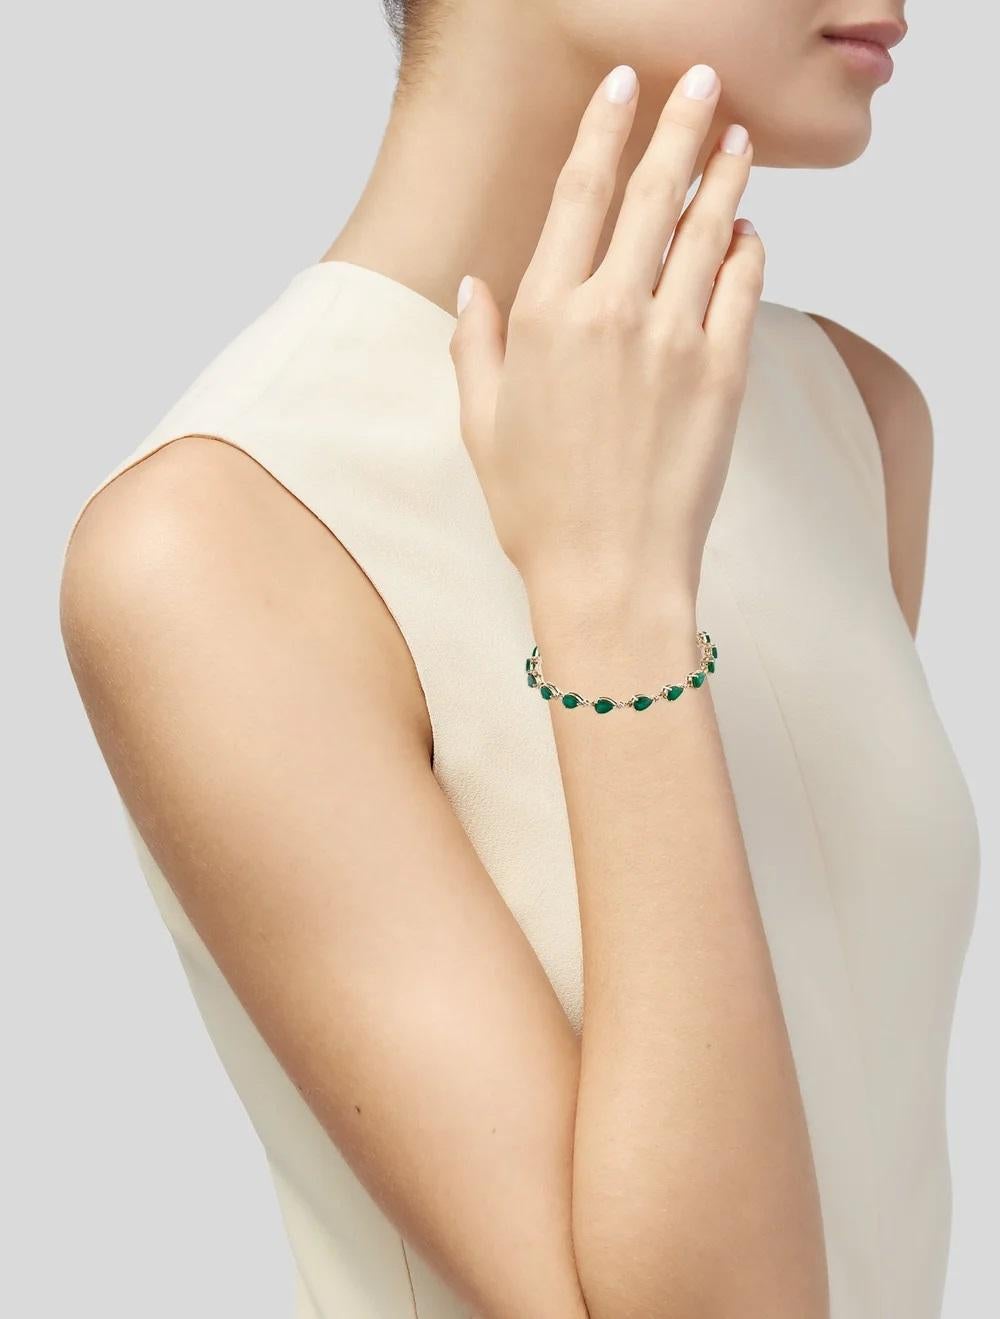 Experience timeless elegance with this captivating 14K Yellow Gold Bracelet, adorned with a mesmerizing 5.76 Carat Pear Modified Brilliant Emerald centerpiece. Crafted to perfection, this exquisite piece exudes sophistication and grace. Delicately